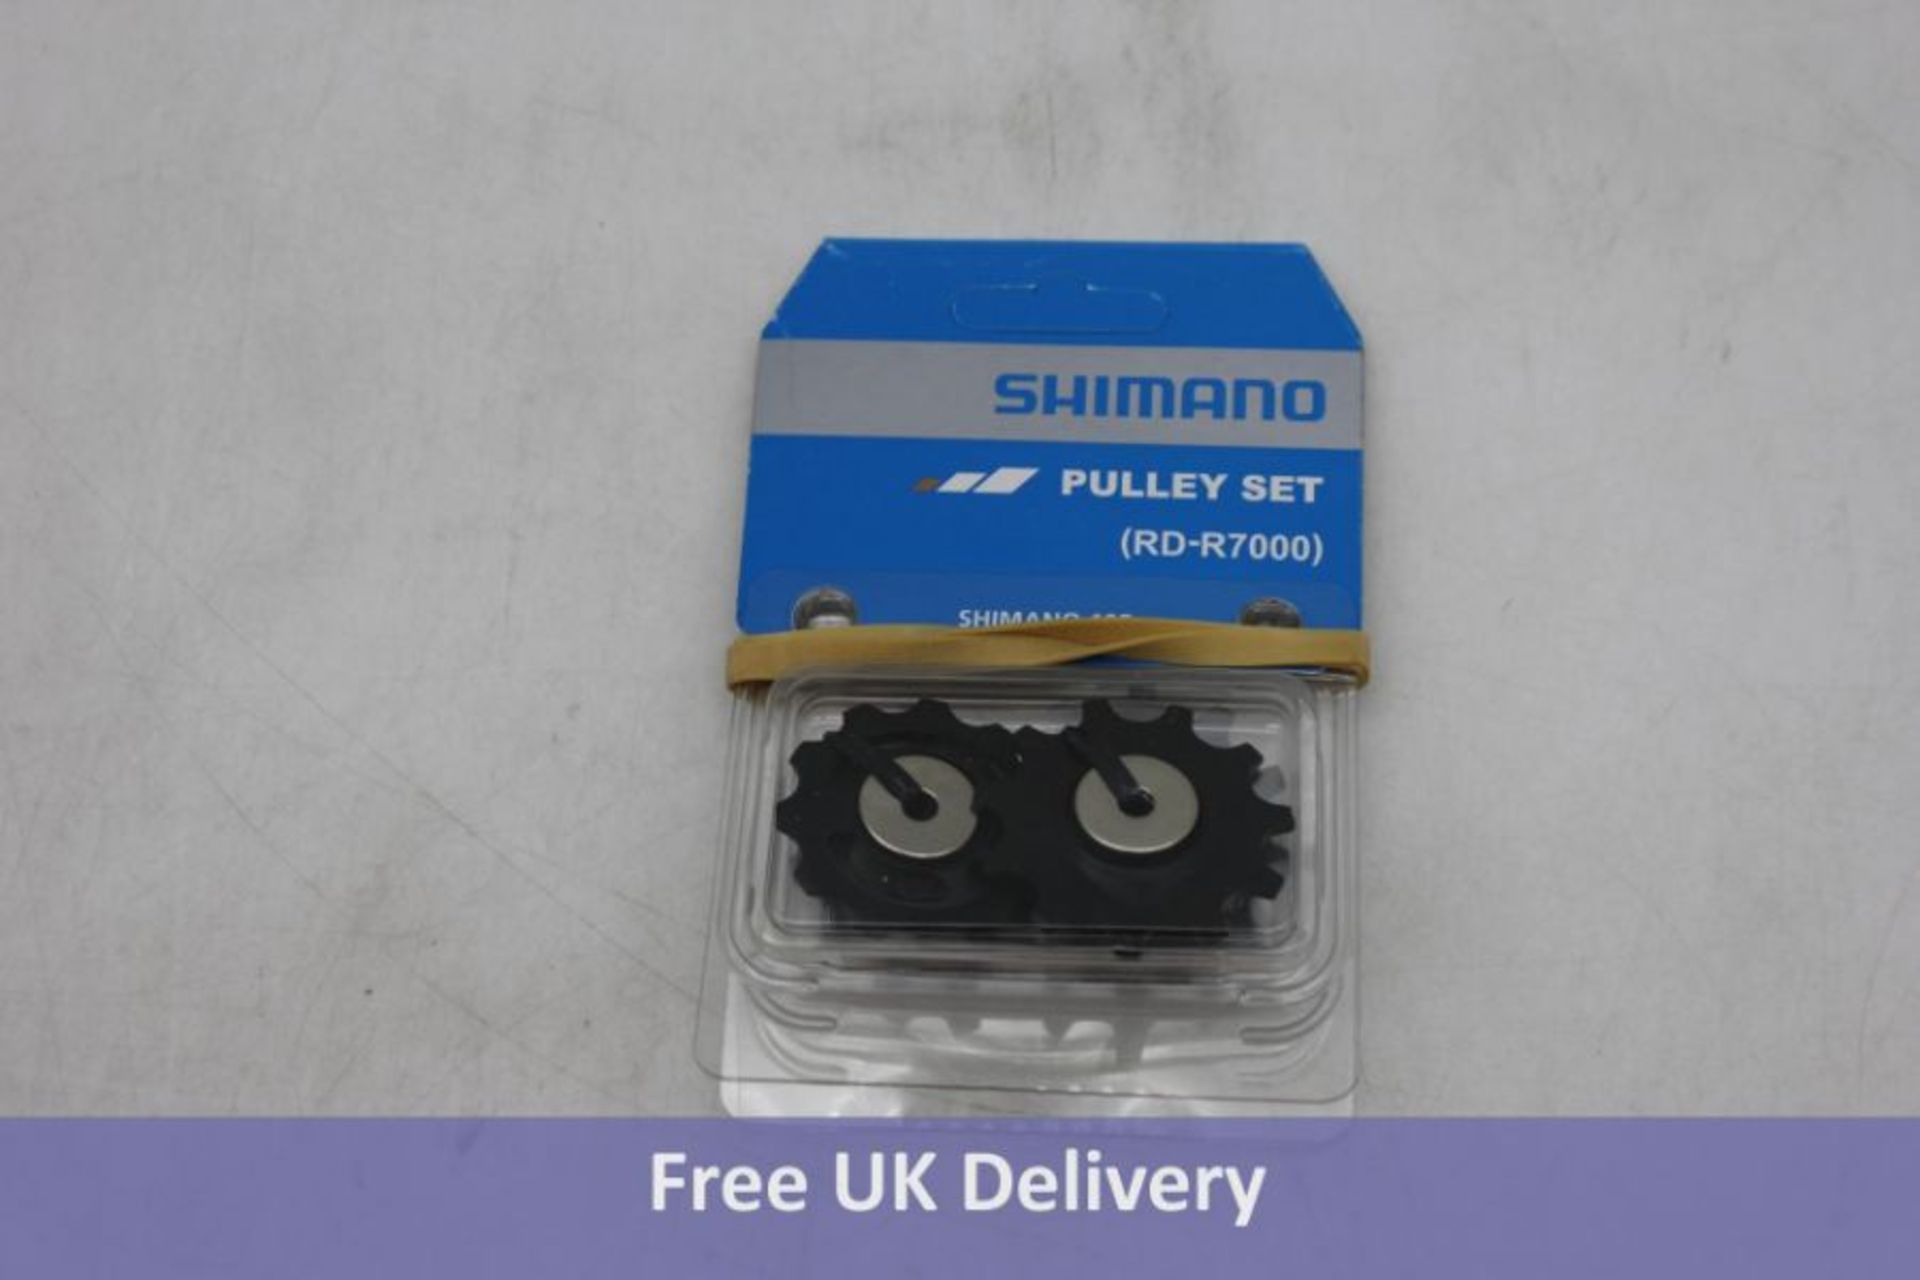 Two Shimano RD-R7000 Tension And Guide Pulley Sets